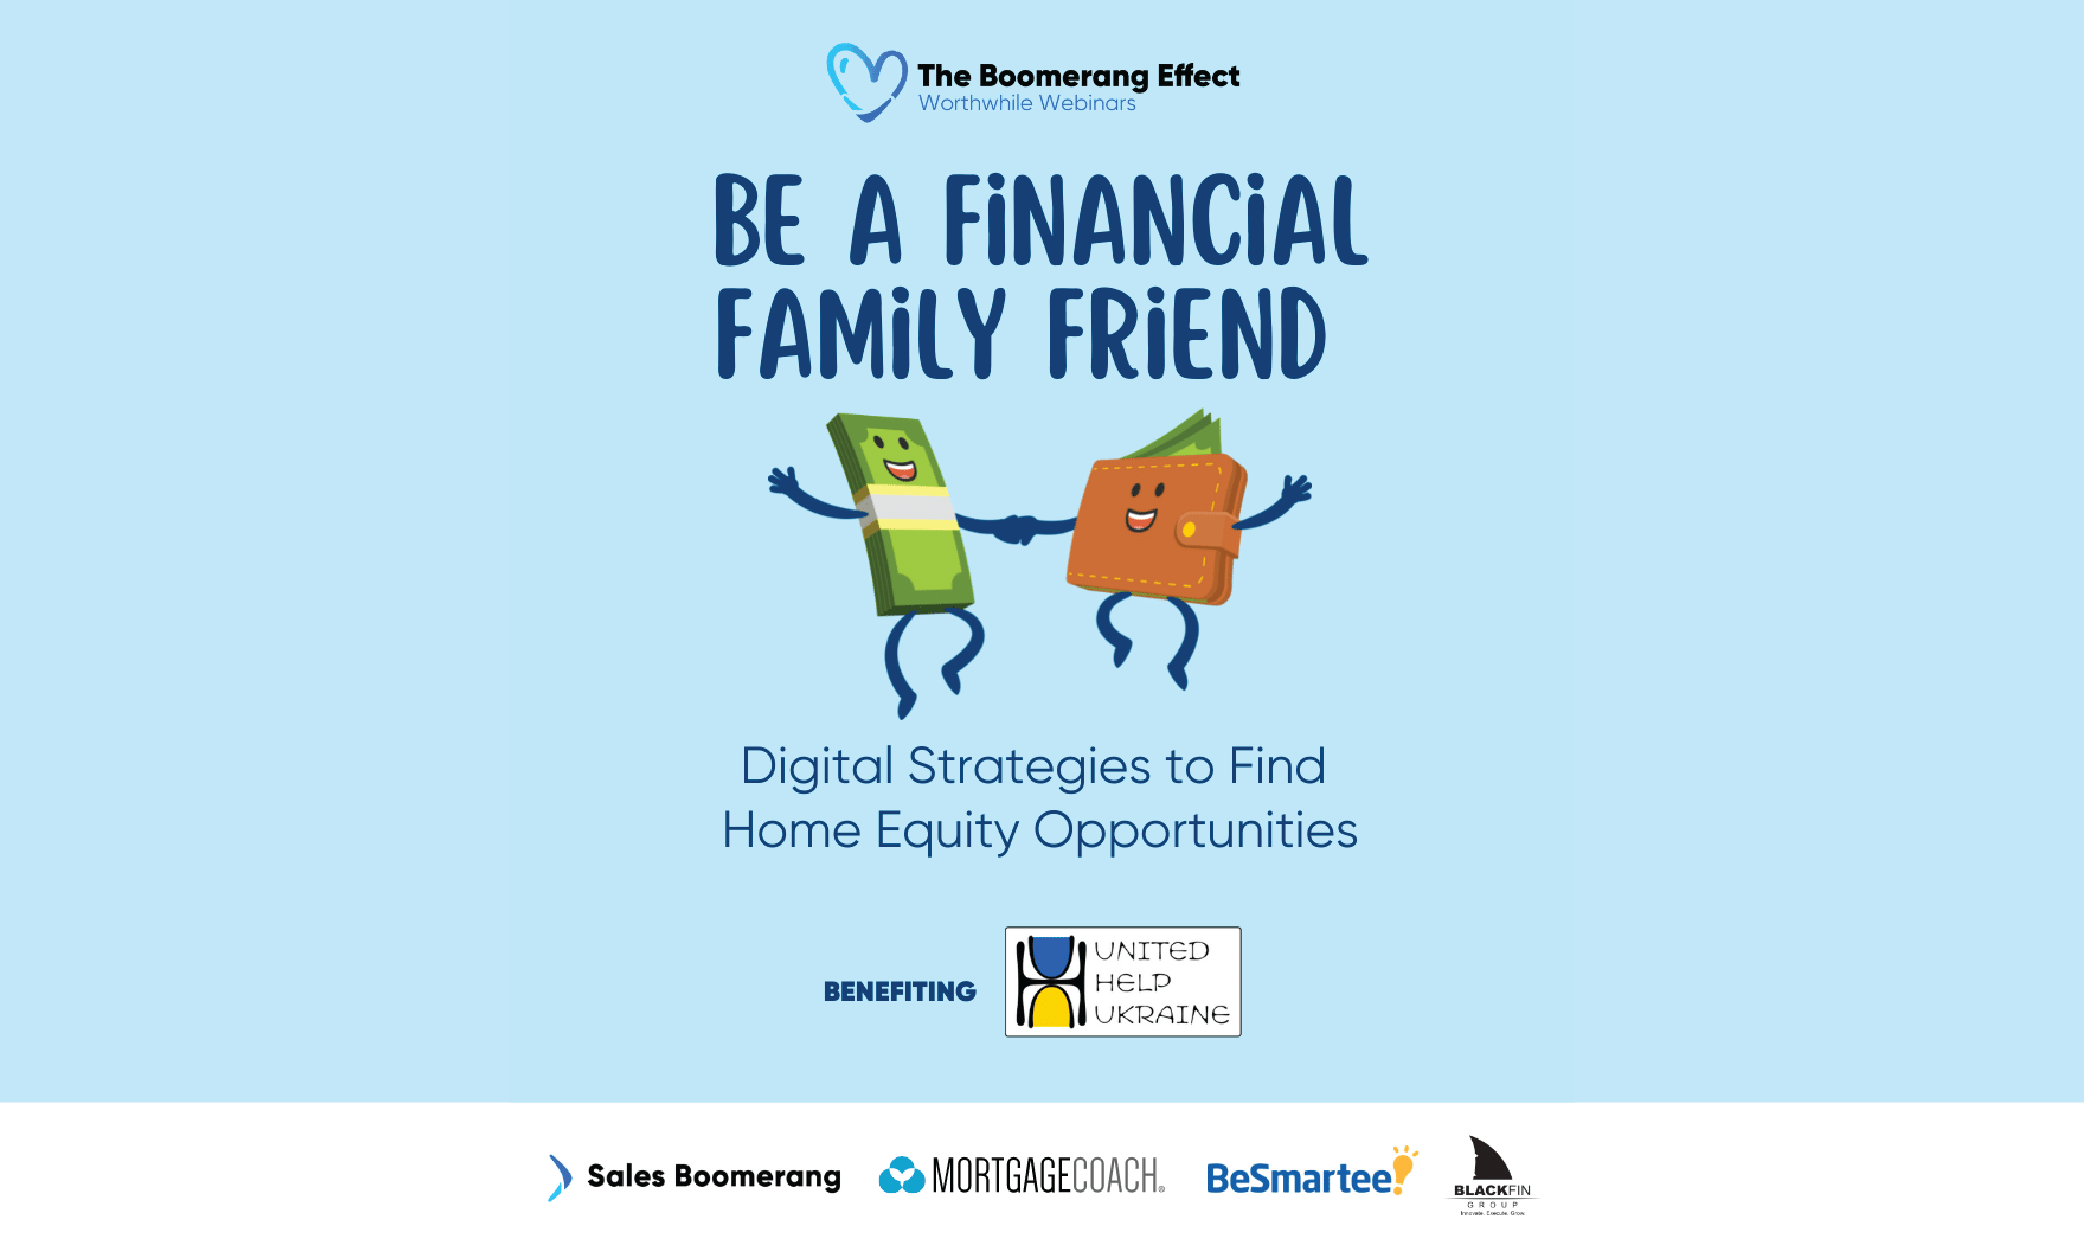 BeSmartee CEO & Co-Founder Tim Nguyen | Sales Boomerang + Mortgage Coach Worthwhile Webinar – Be a Financial Family Friend | Digital Strategies to Find Home Equity Opportunities